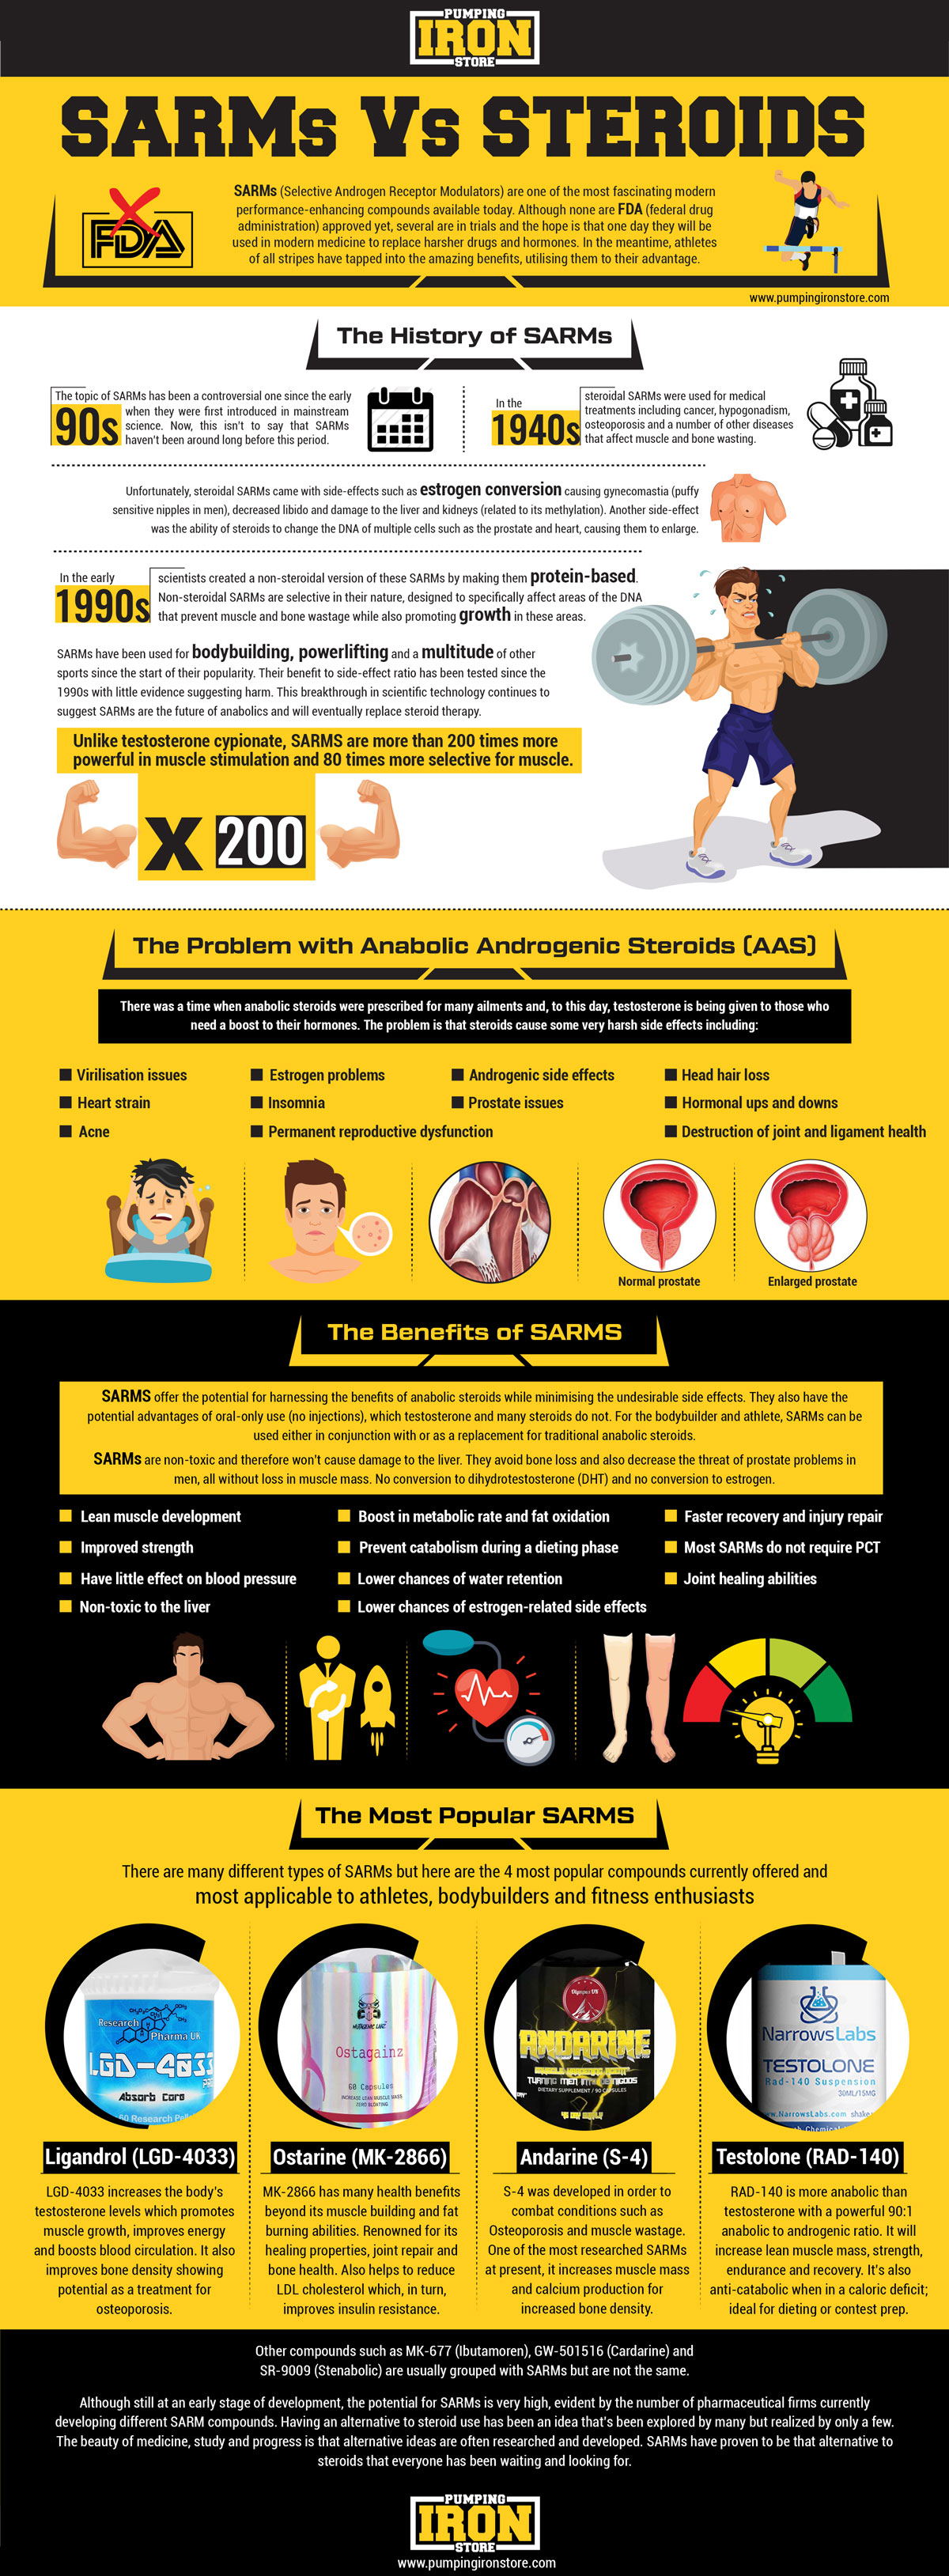 sarms vs steroids infographic 2019